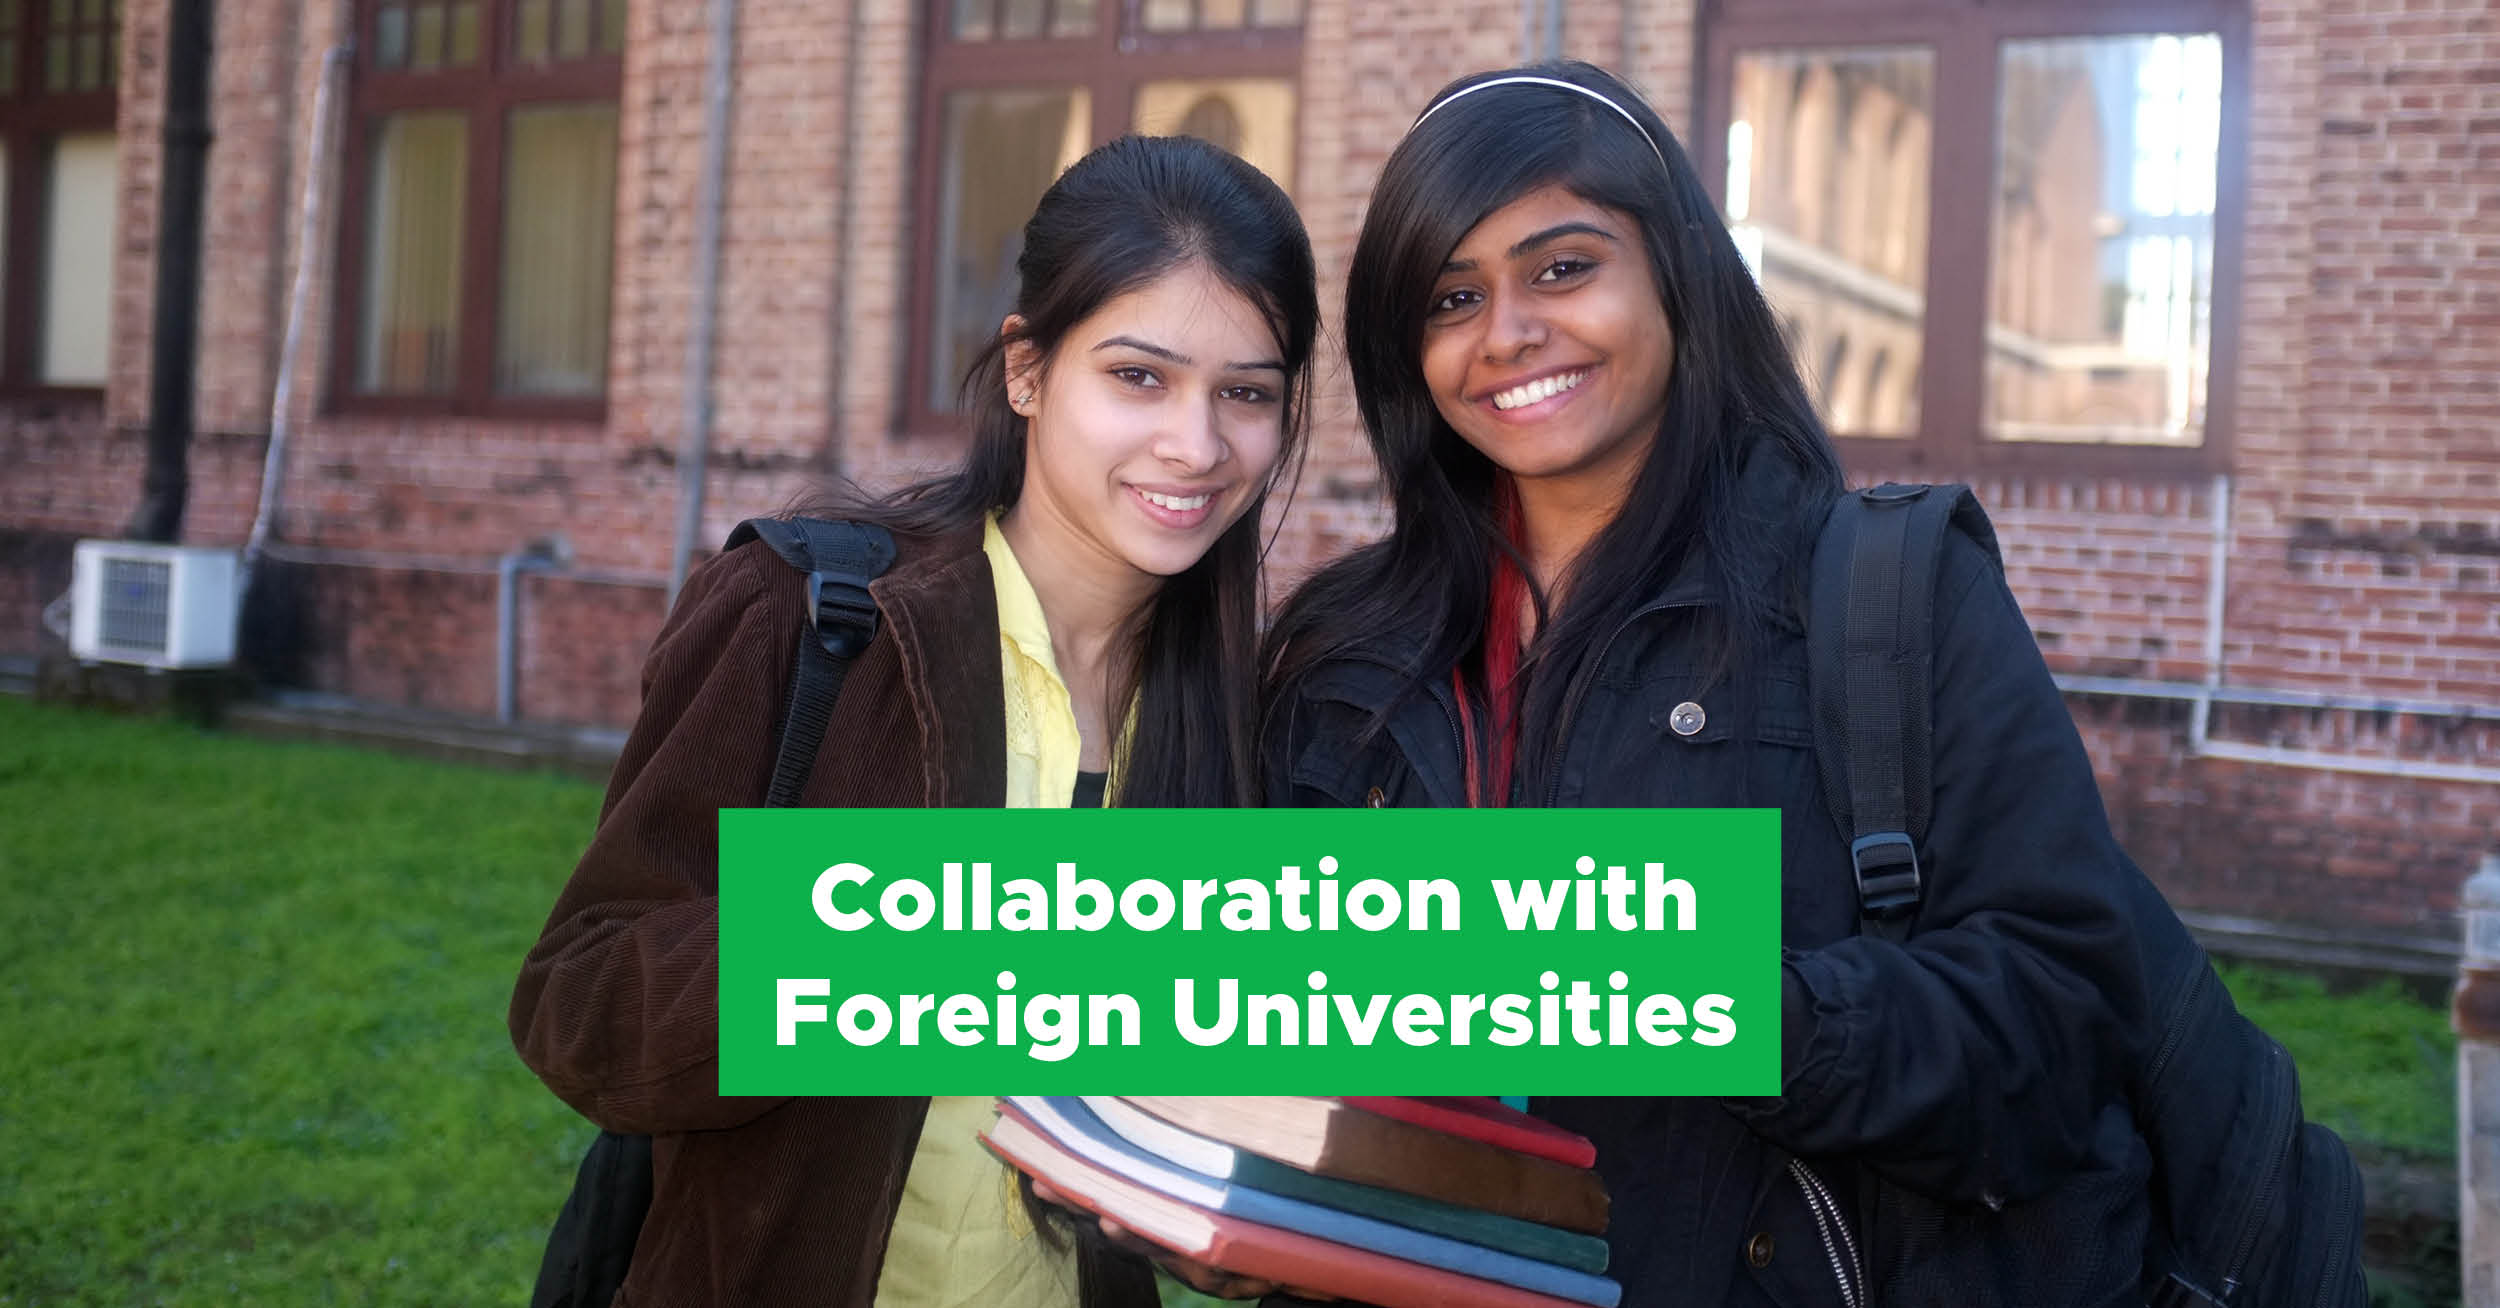 5. Collaboration with Foreign Universities